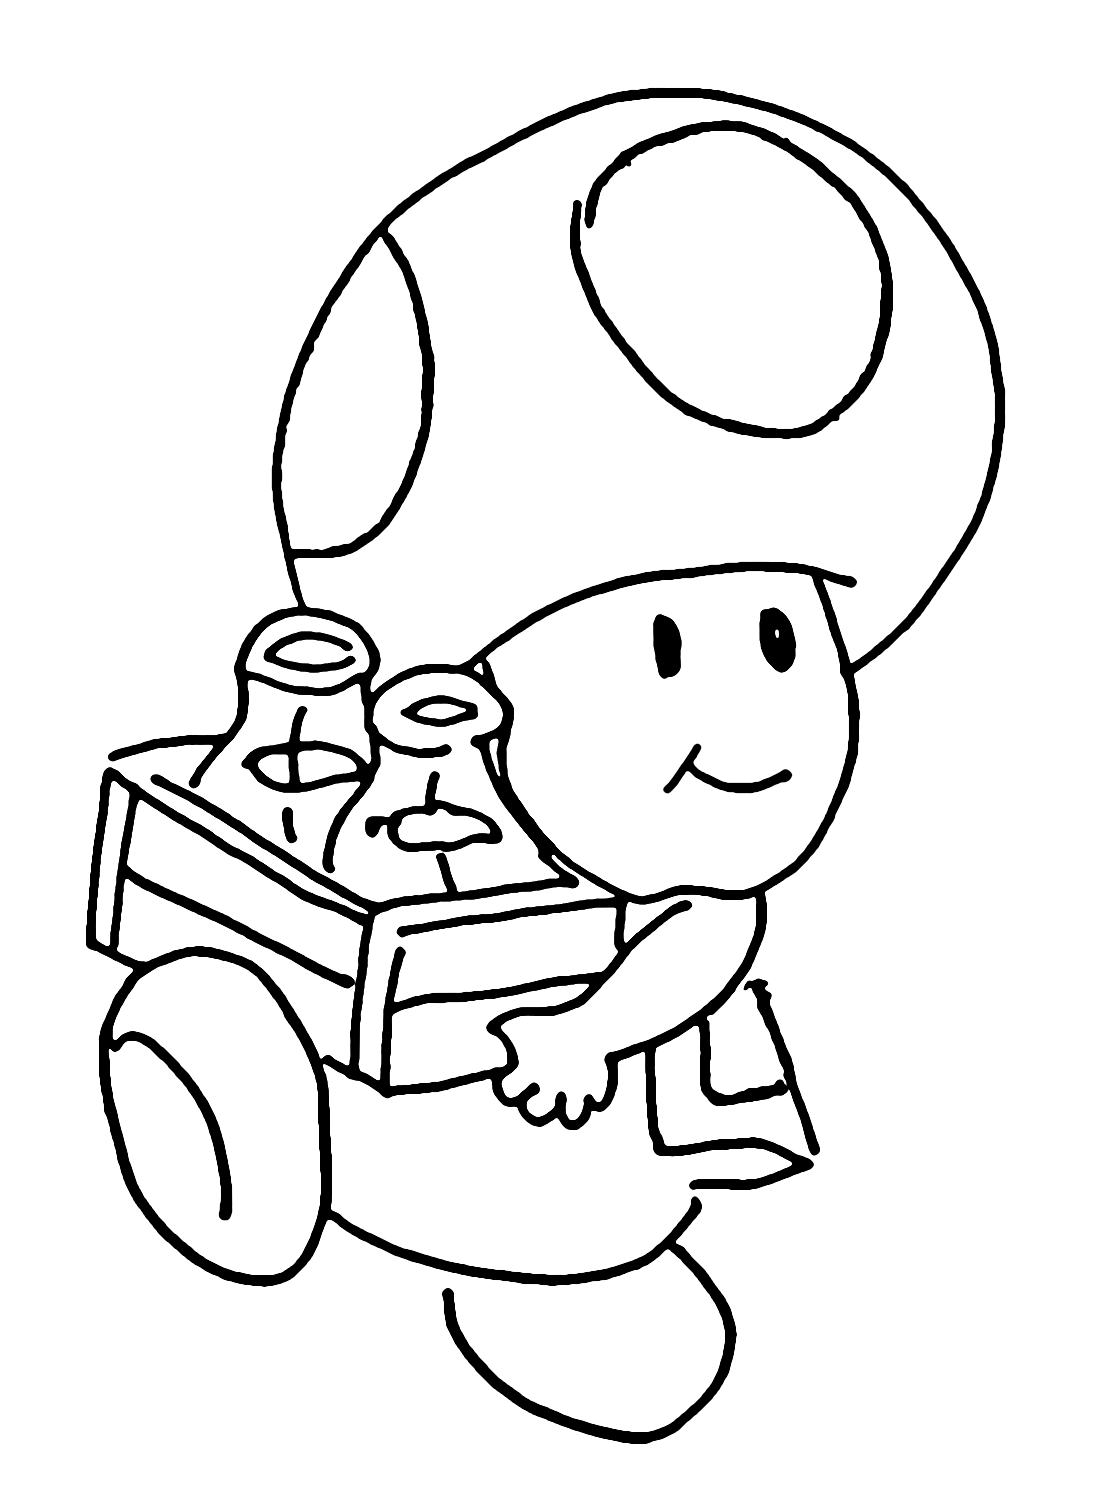 Toad from Super Mario Coloring Page